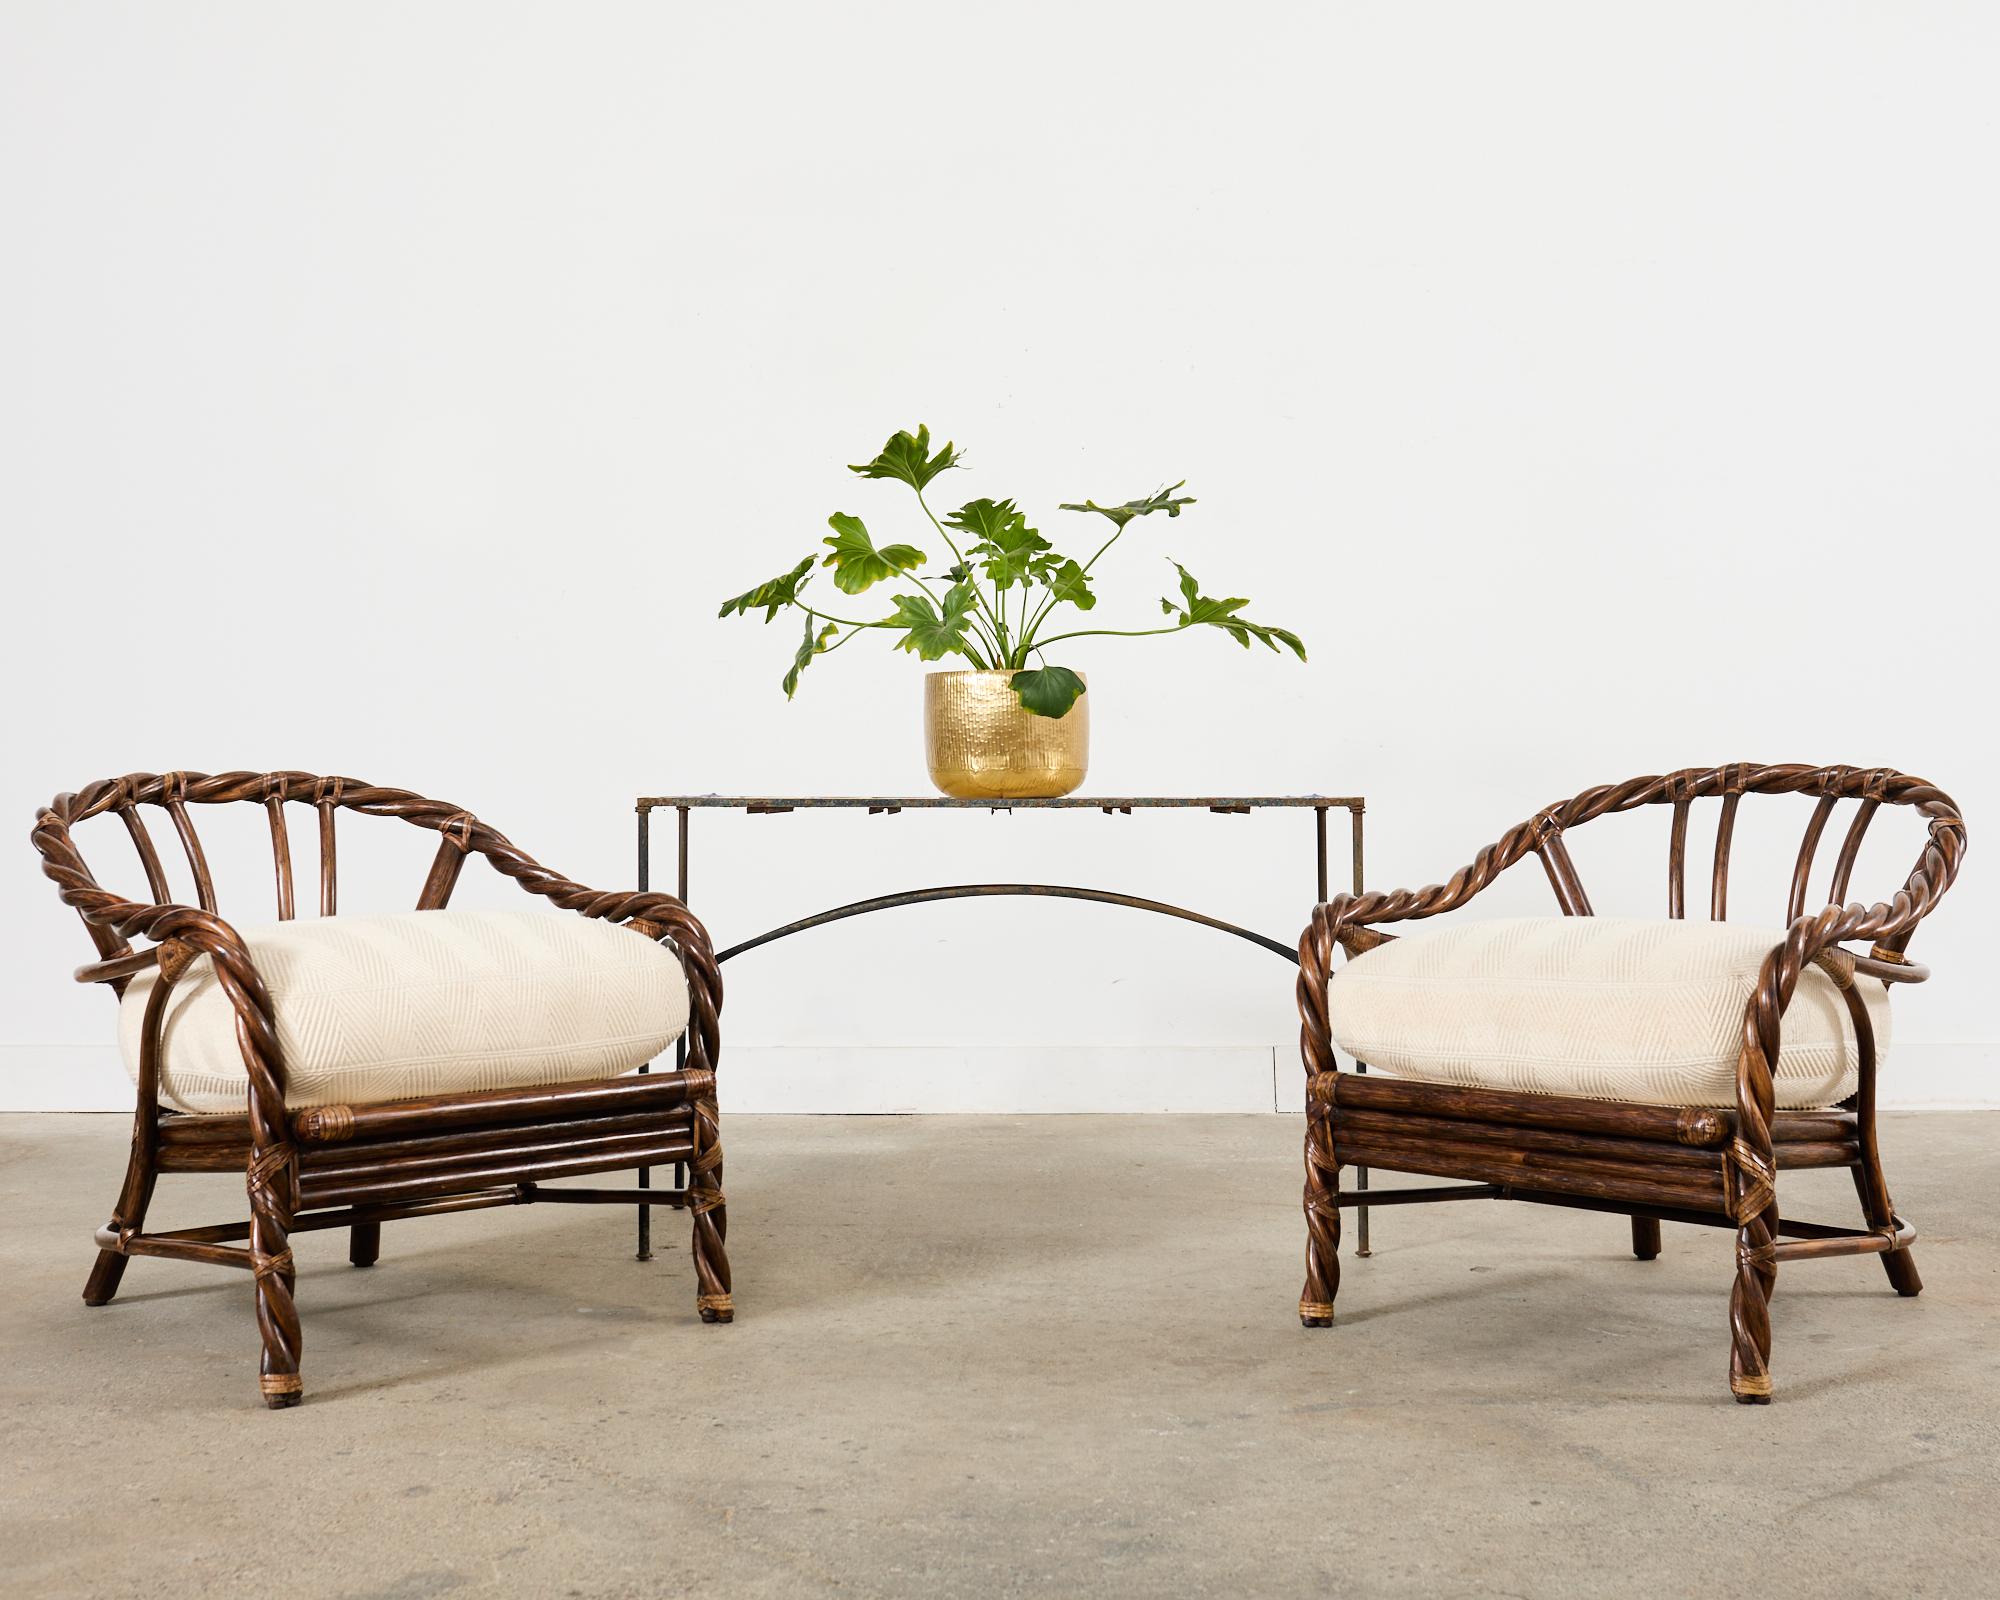 Fabulous and rare pair of rattan lounge chairs or club chairs crafted by McGuire in the California organic modern style. These iconic chairs feature bent rattan poles twisted together resembling rope. Gracefully curving back and arms support thick